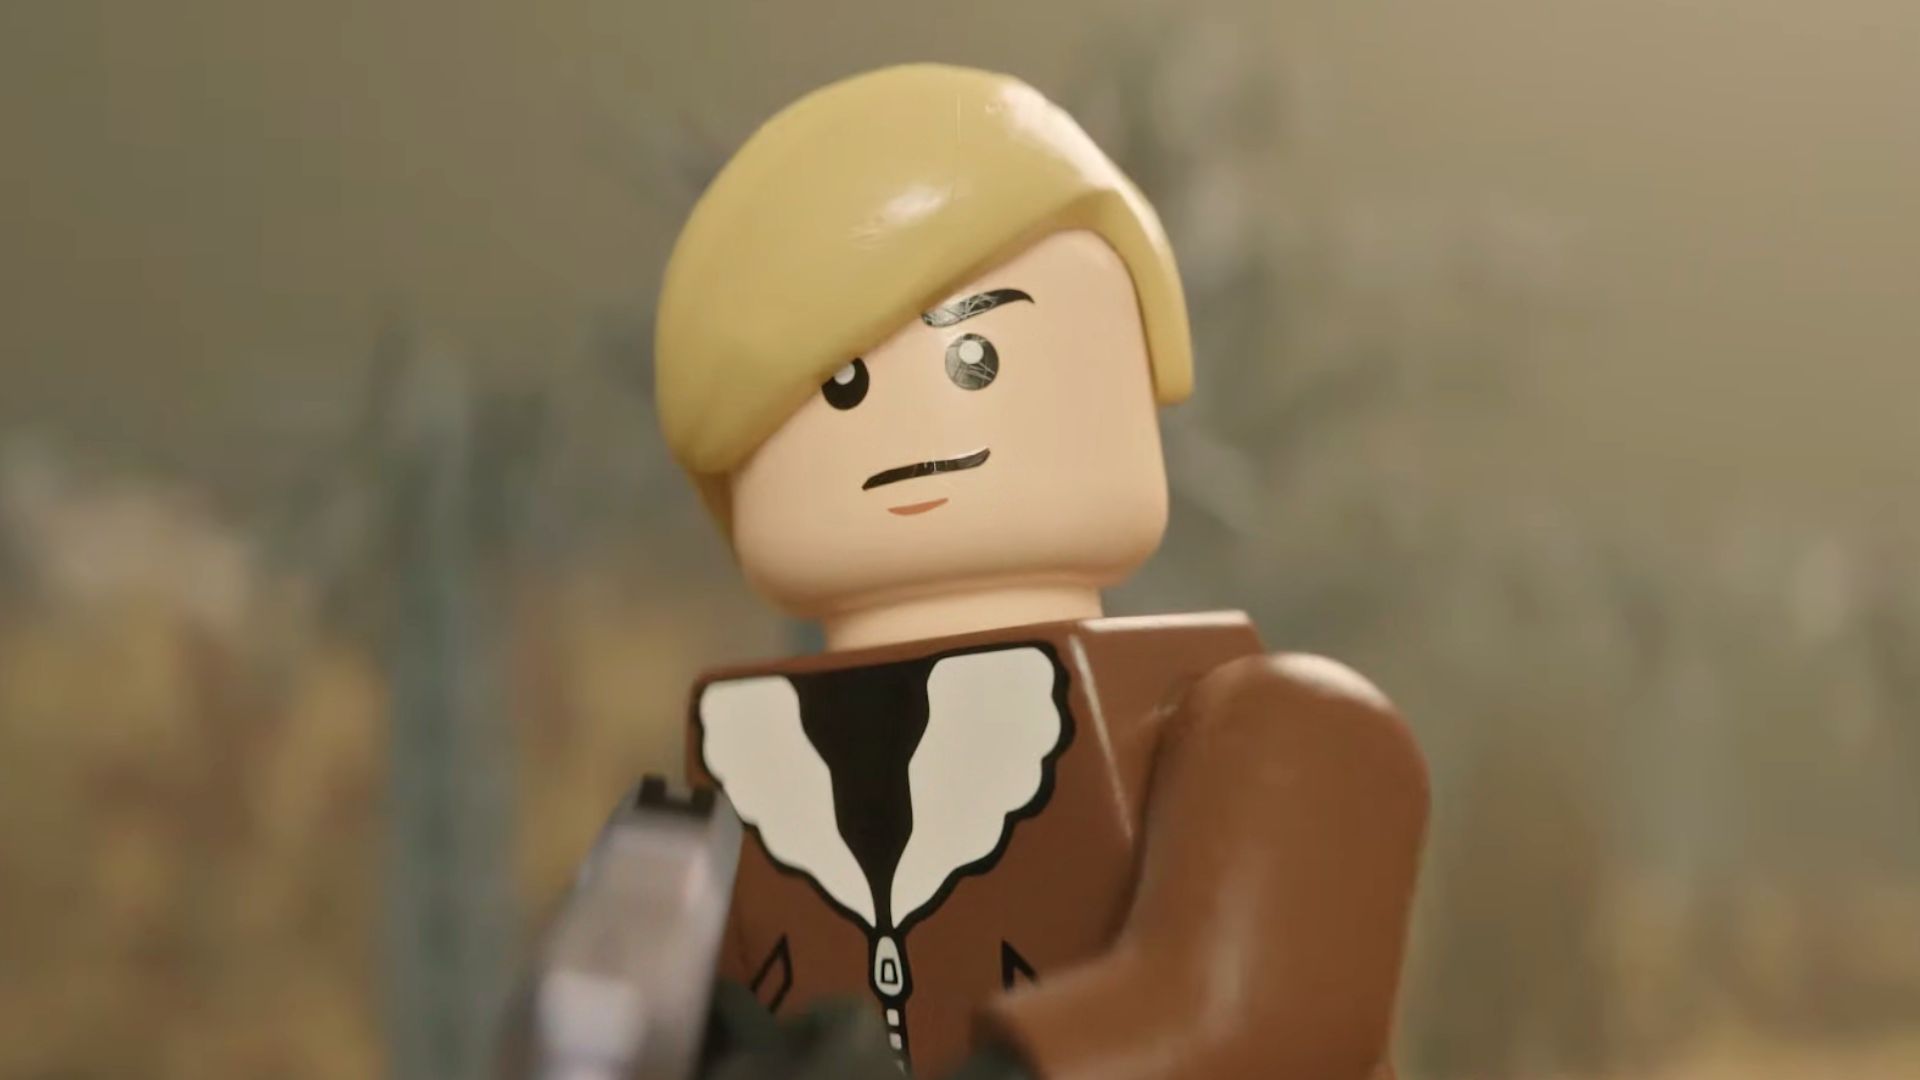 Lego Resident Evil 4 has over 3,000 pictures of Leon's plastic bangs